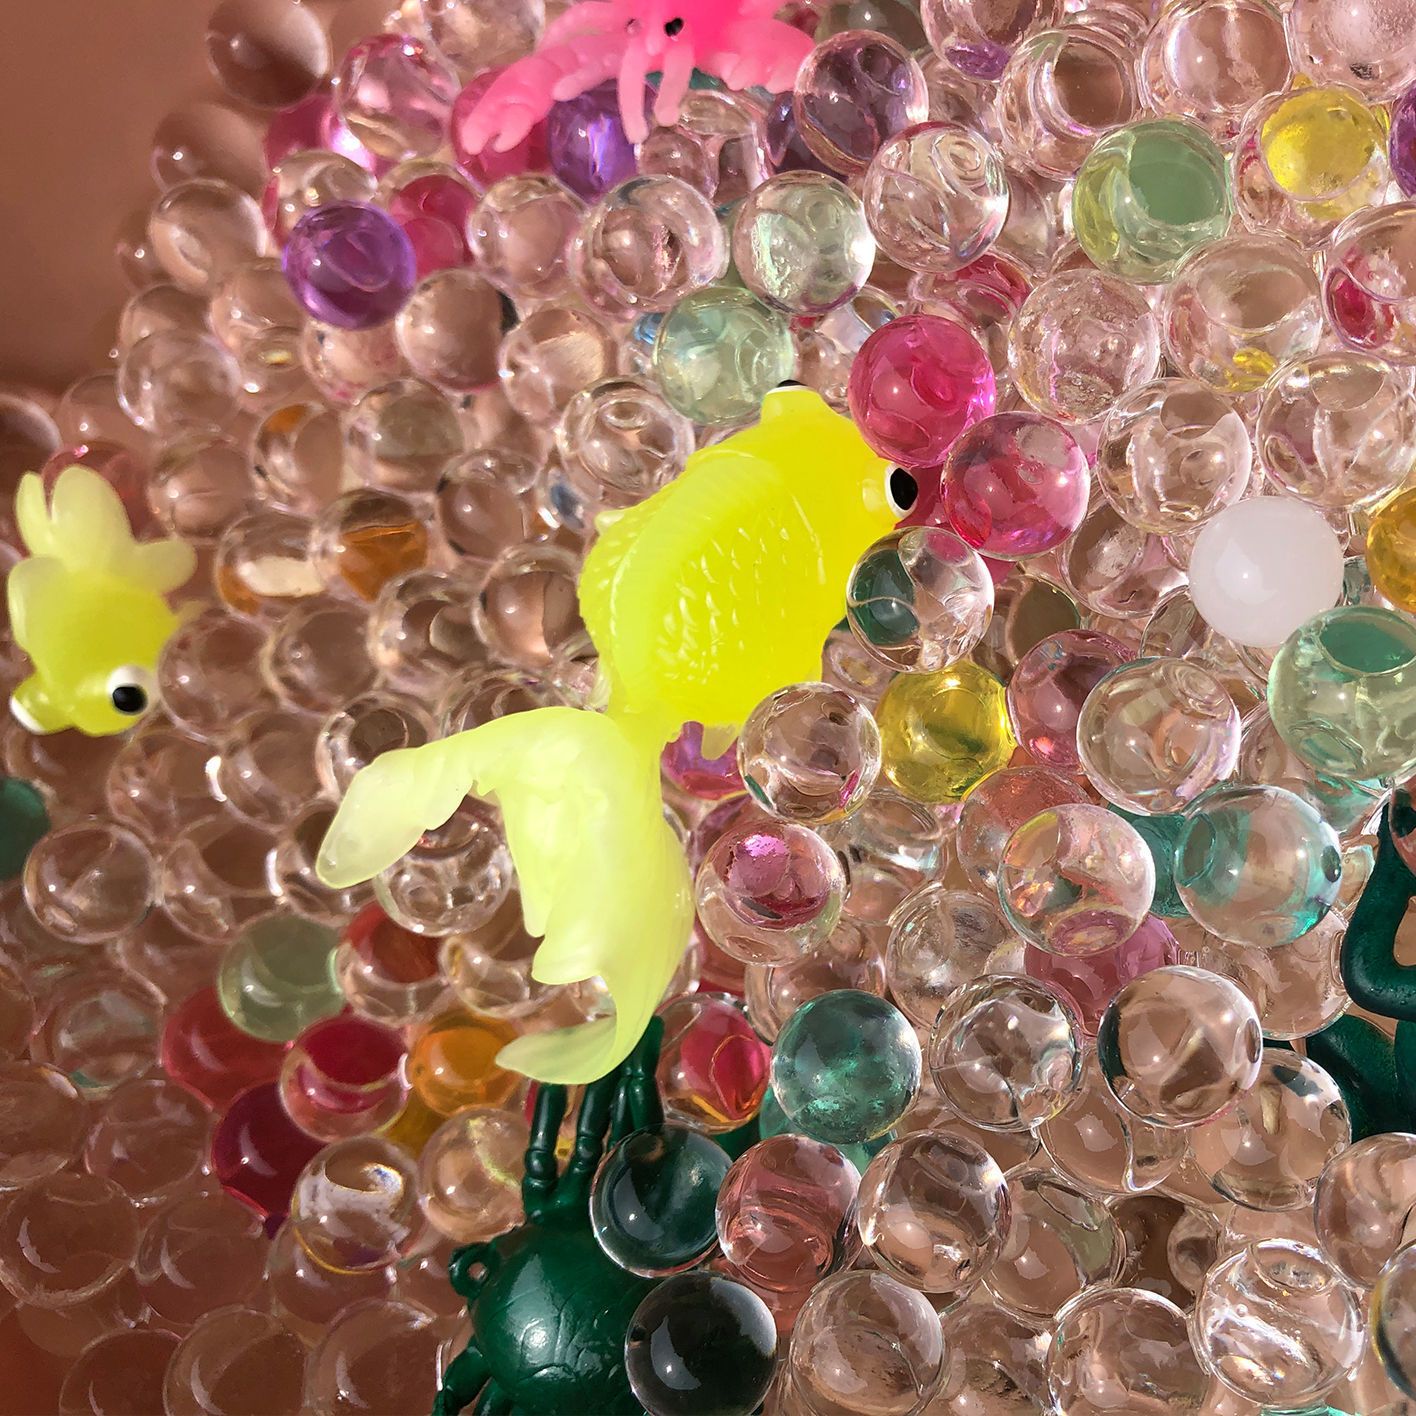 Japanese Fish Catching Toy Baby Early Education Children Playing with Water Simulation Goldfish Net Bag Silicone Fish Soft Rubber Animal Puzzle